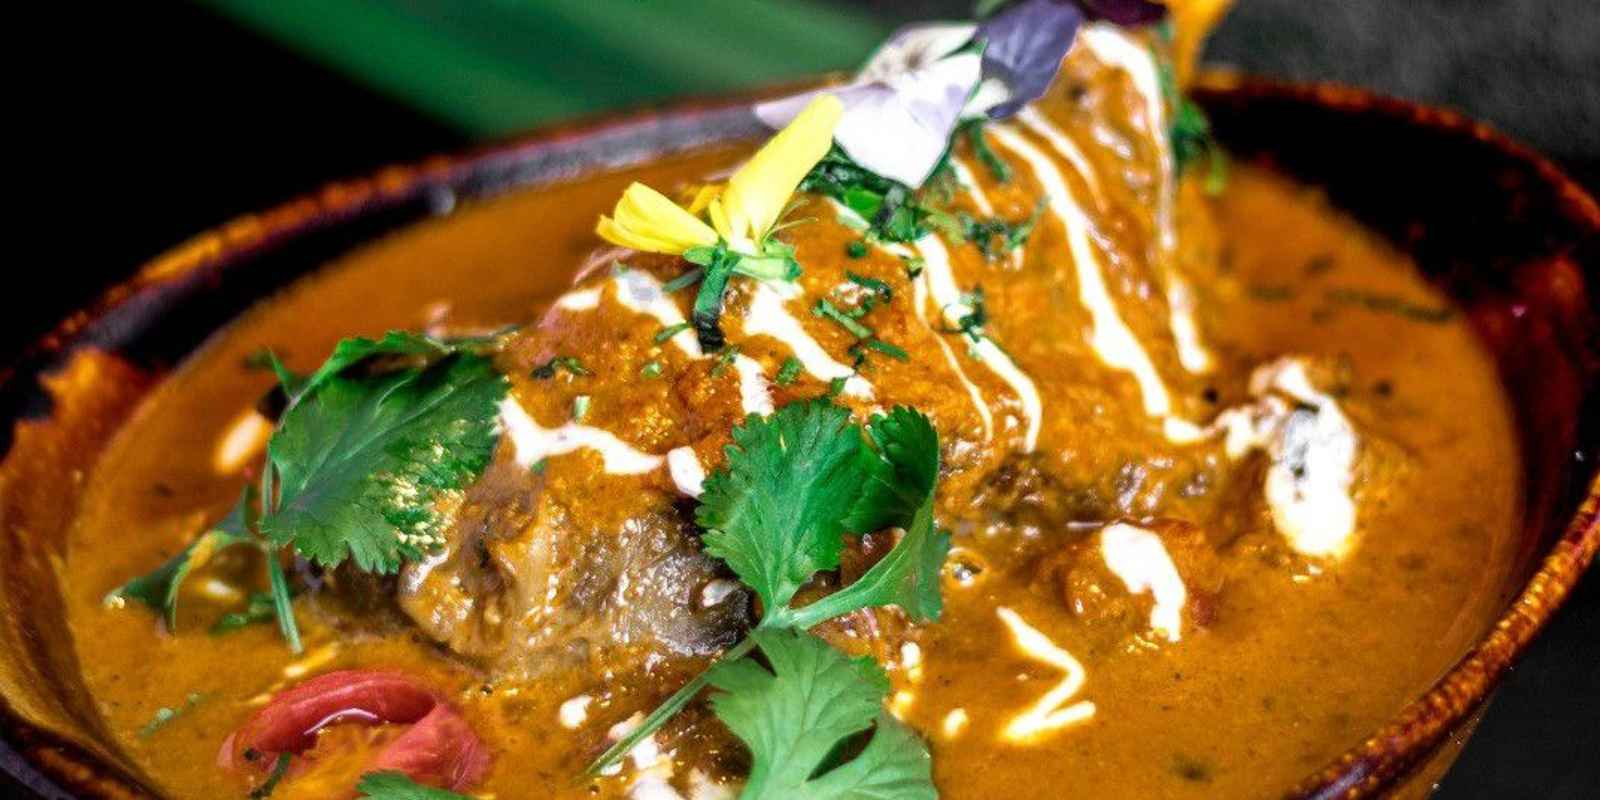 Enter to win £150 worth of bold and fiery tastes at Asha's